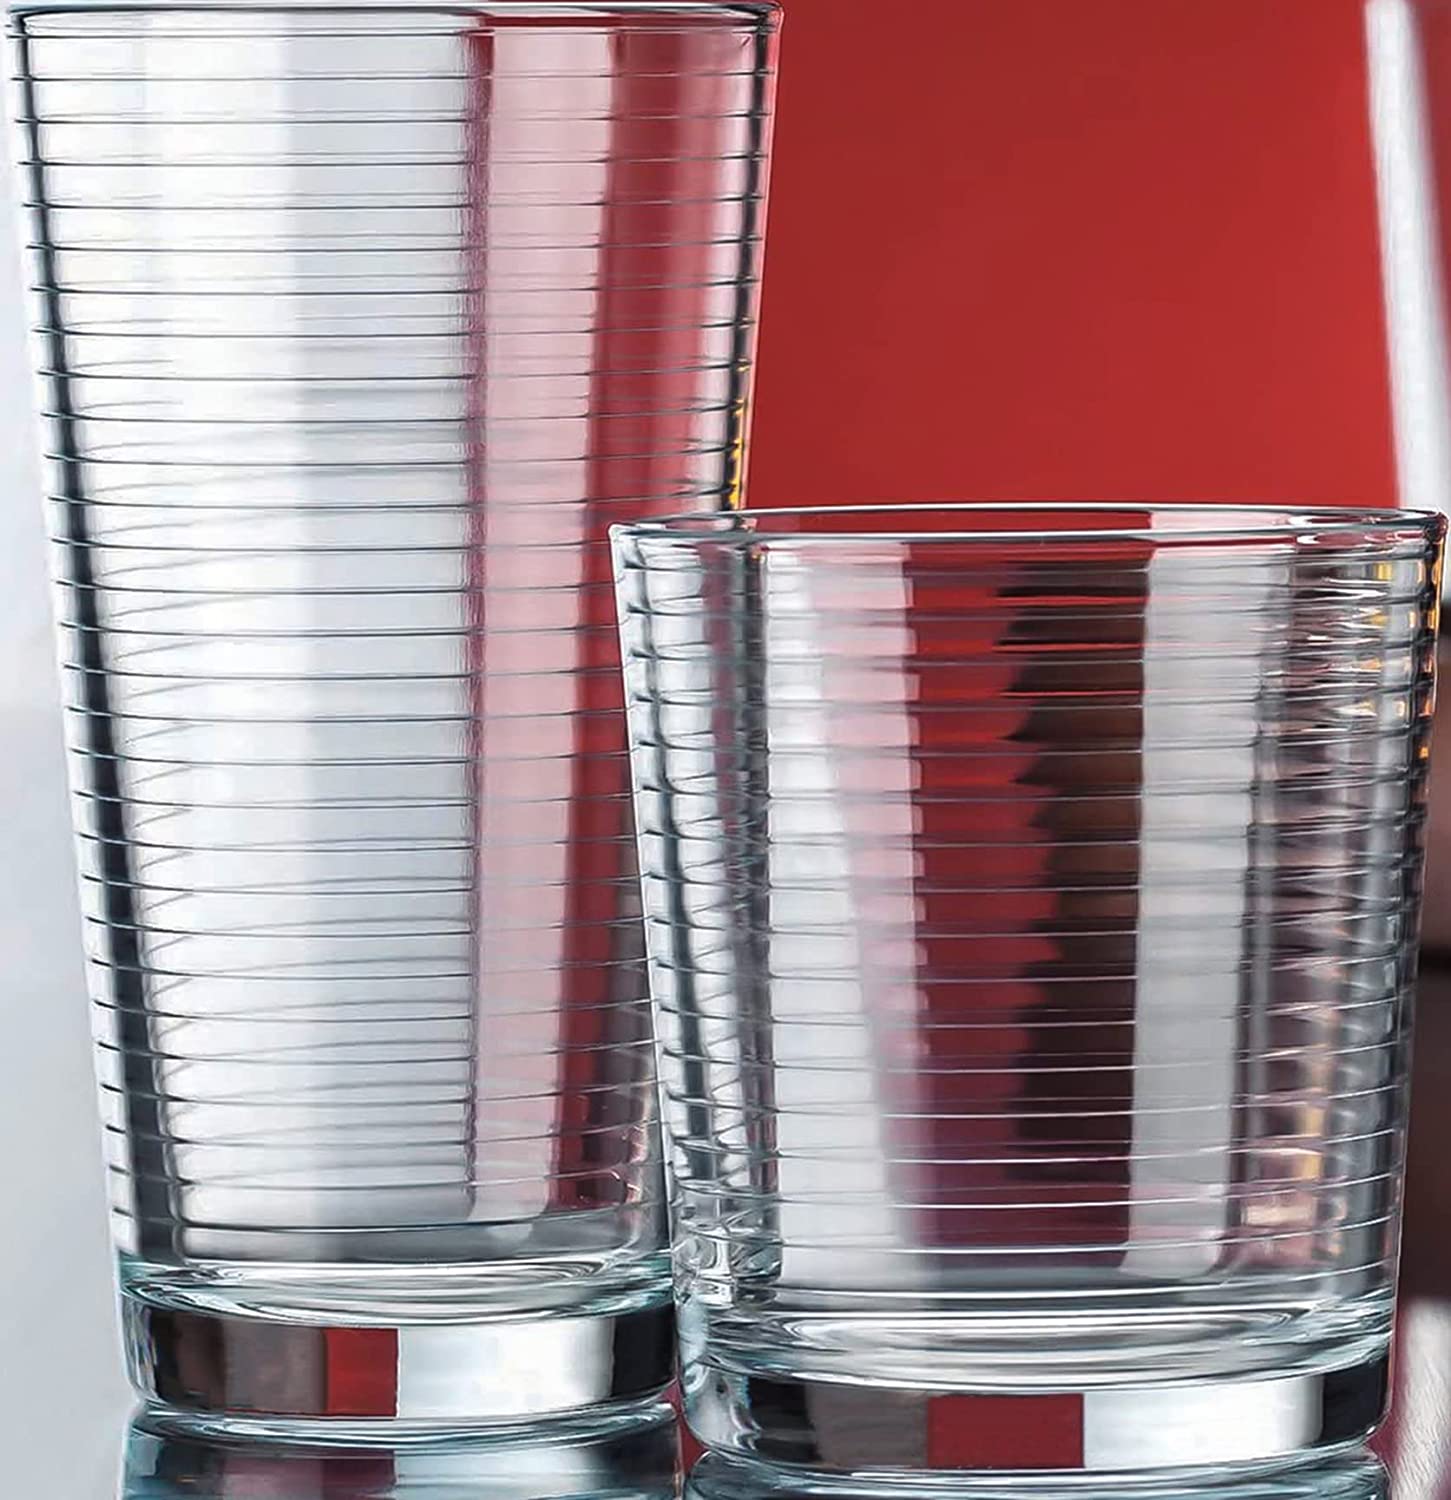 https://www.dontwasteyourmoney.com/wp-content/uploads/2020/09/leraze-heavy-base-ribbed-durable-drinking-glass-16-count.jpg